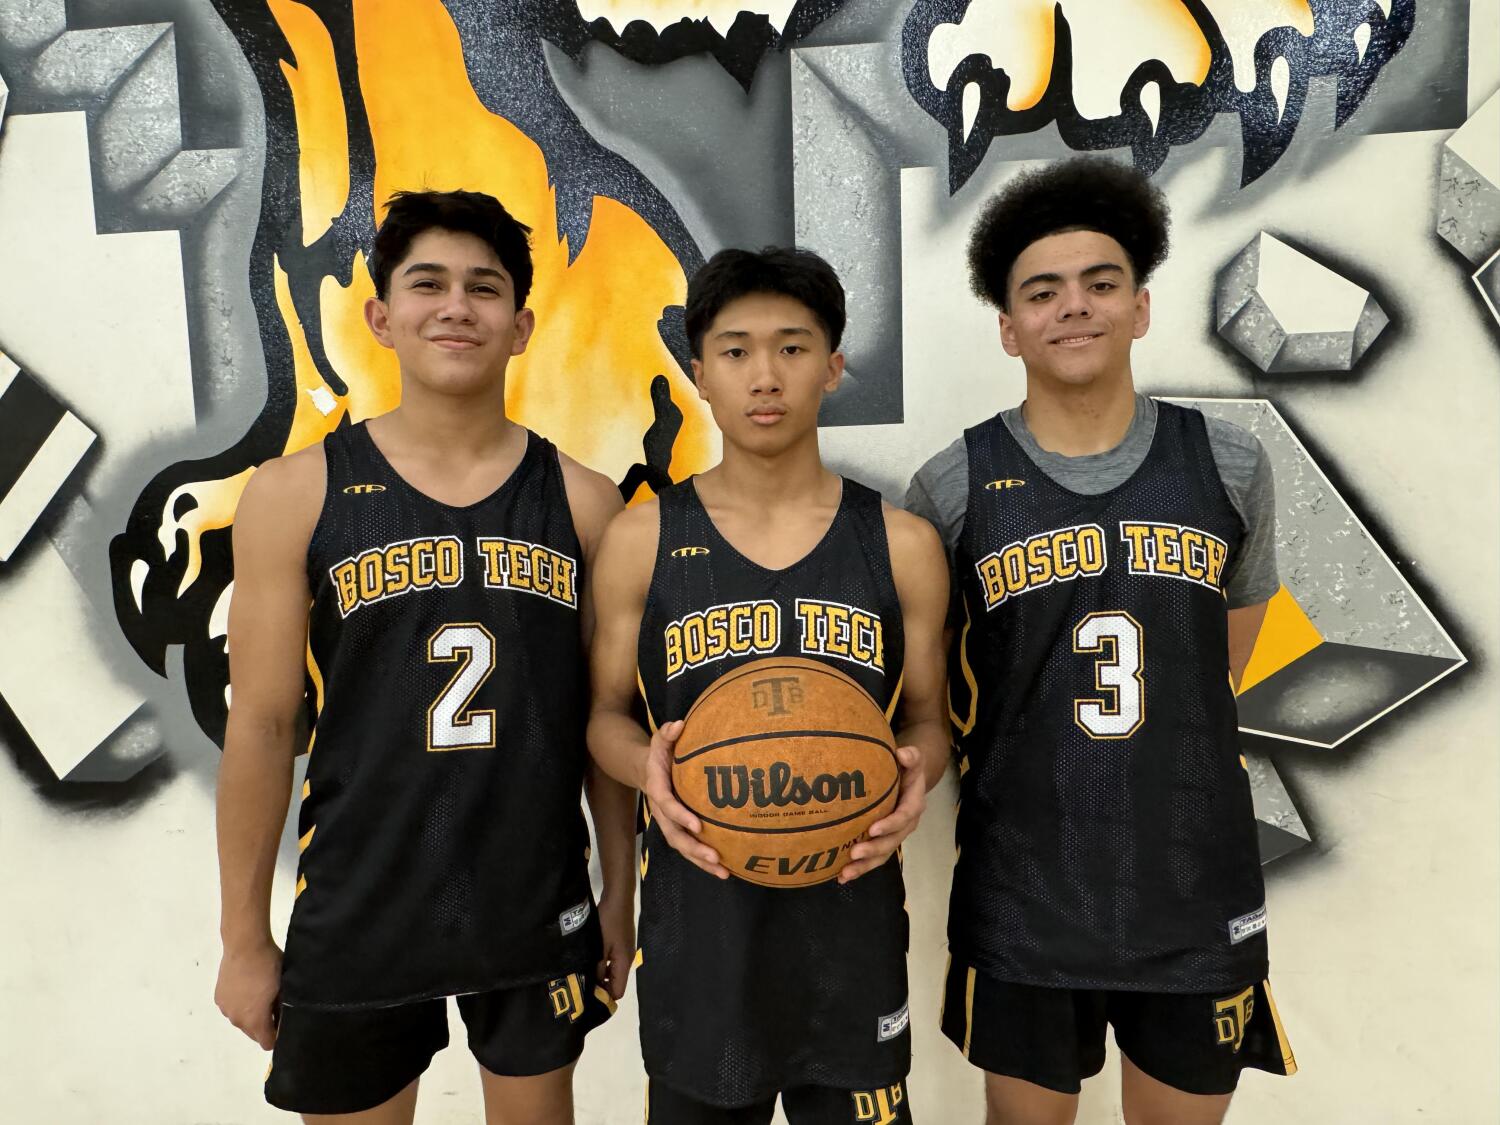 Column: Trio of basketball brothers delivers for Bosco Tech